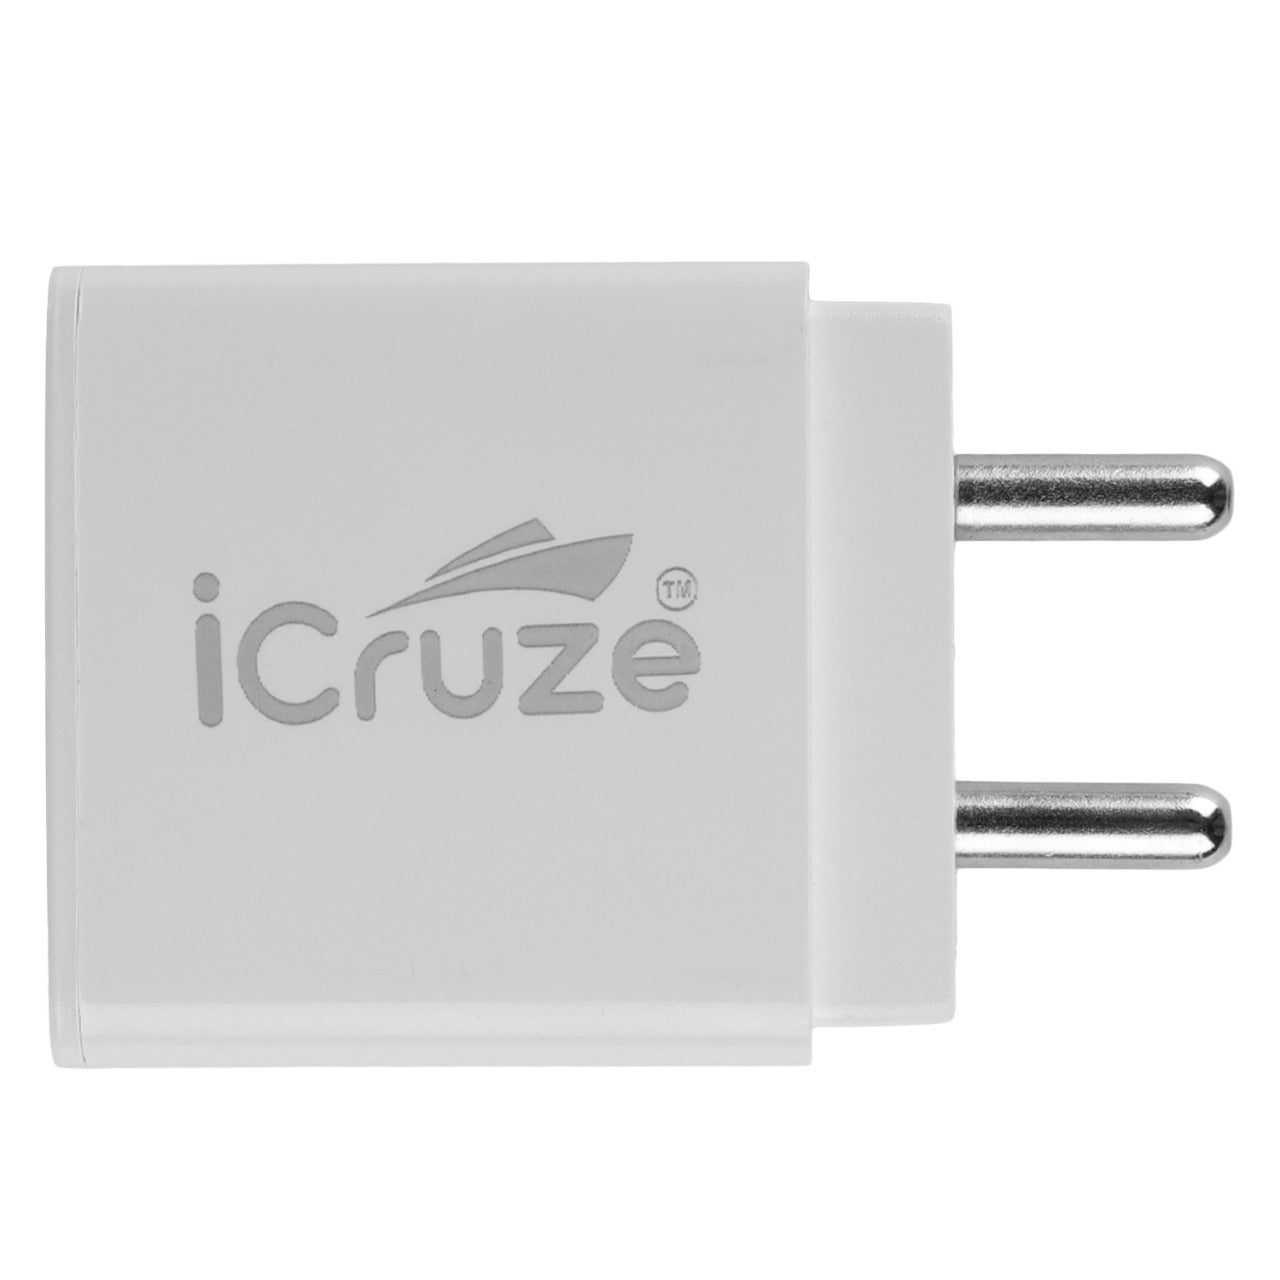 iCruze Elevate 18W Dual USB Wall Charger - iCruze